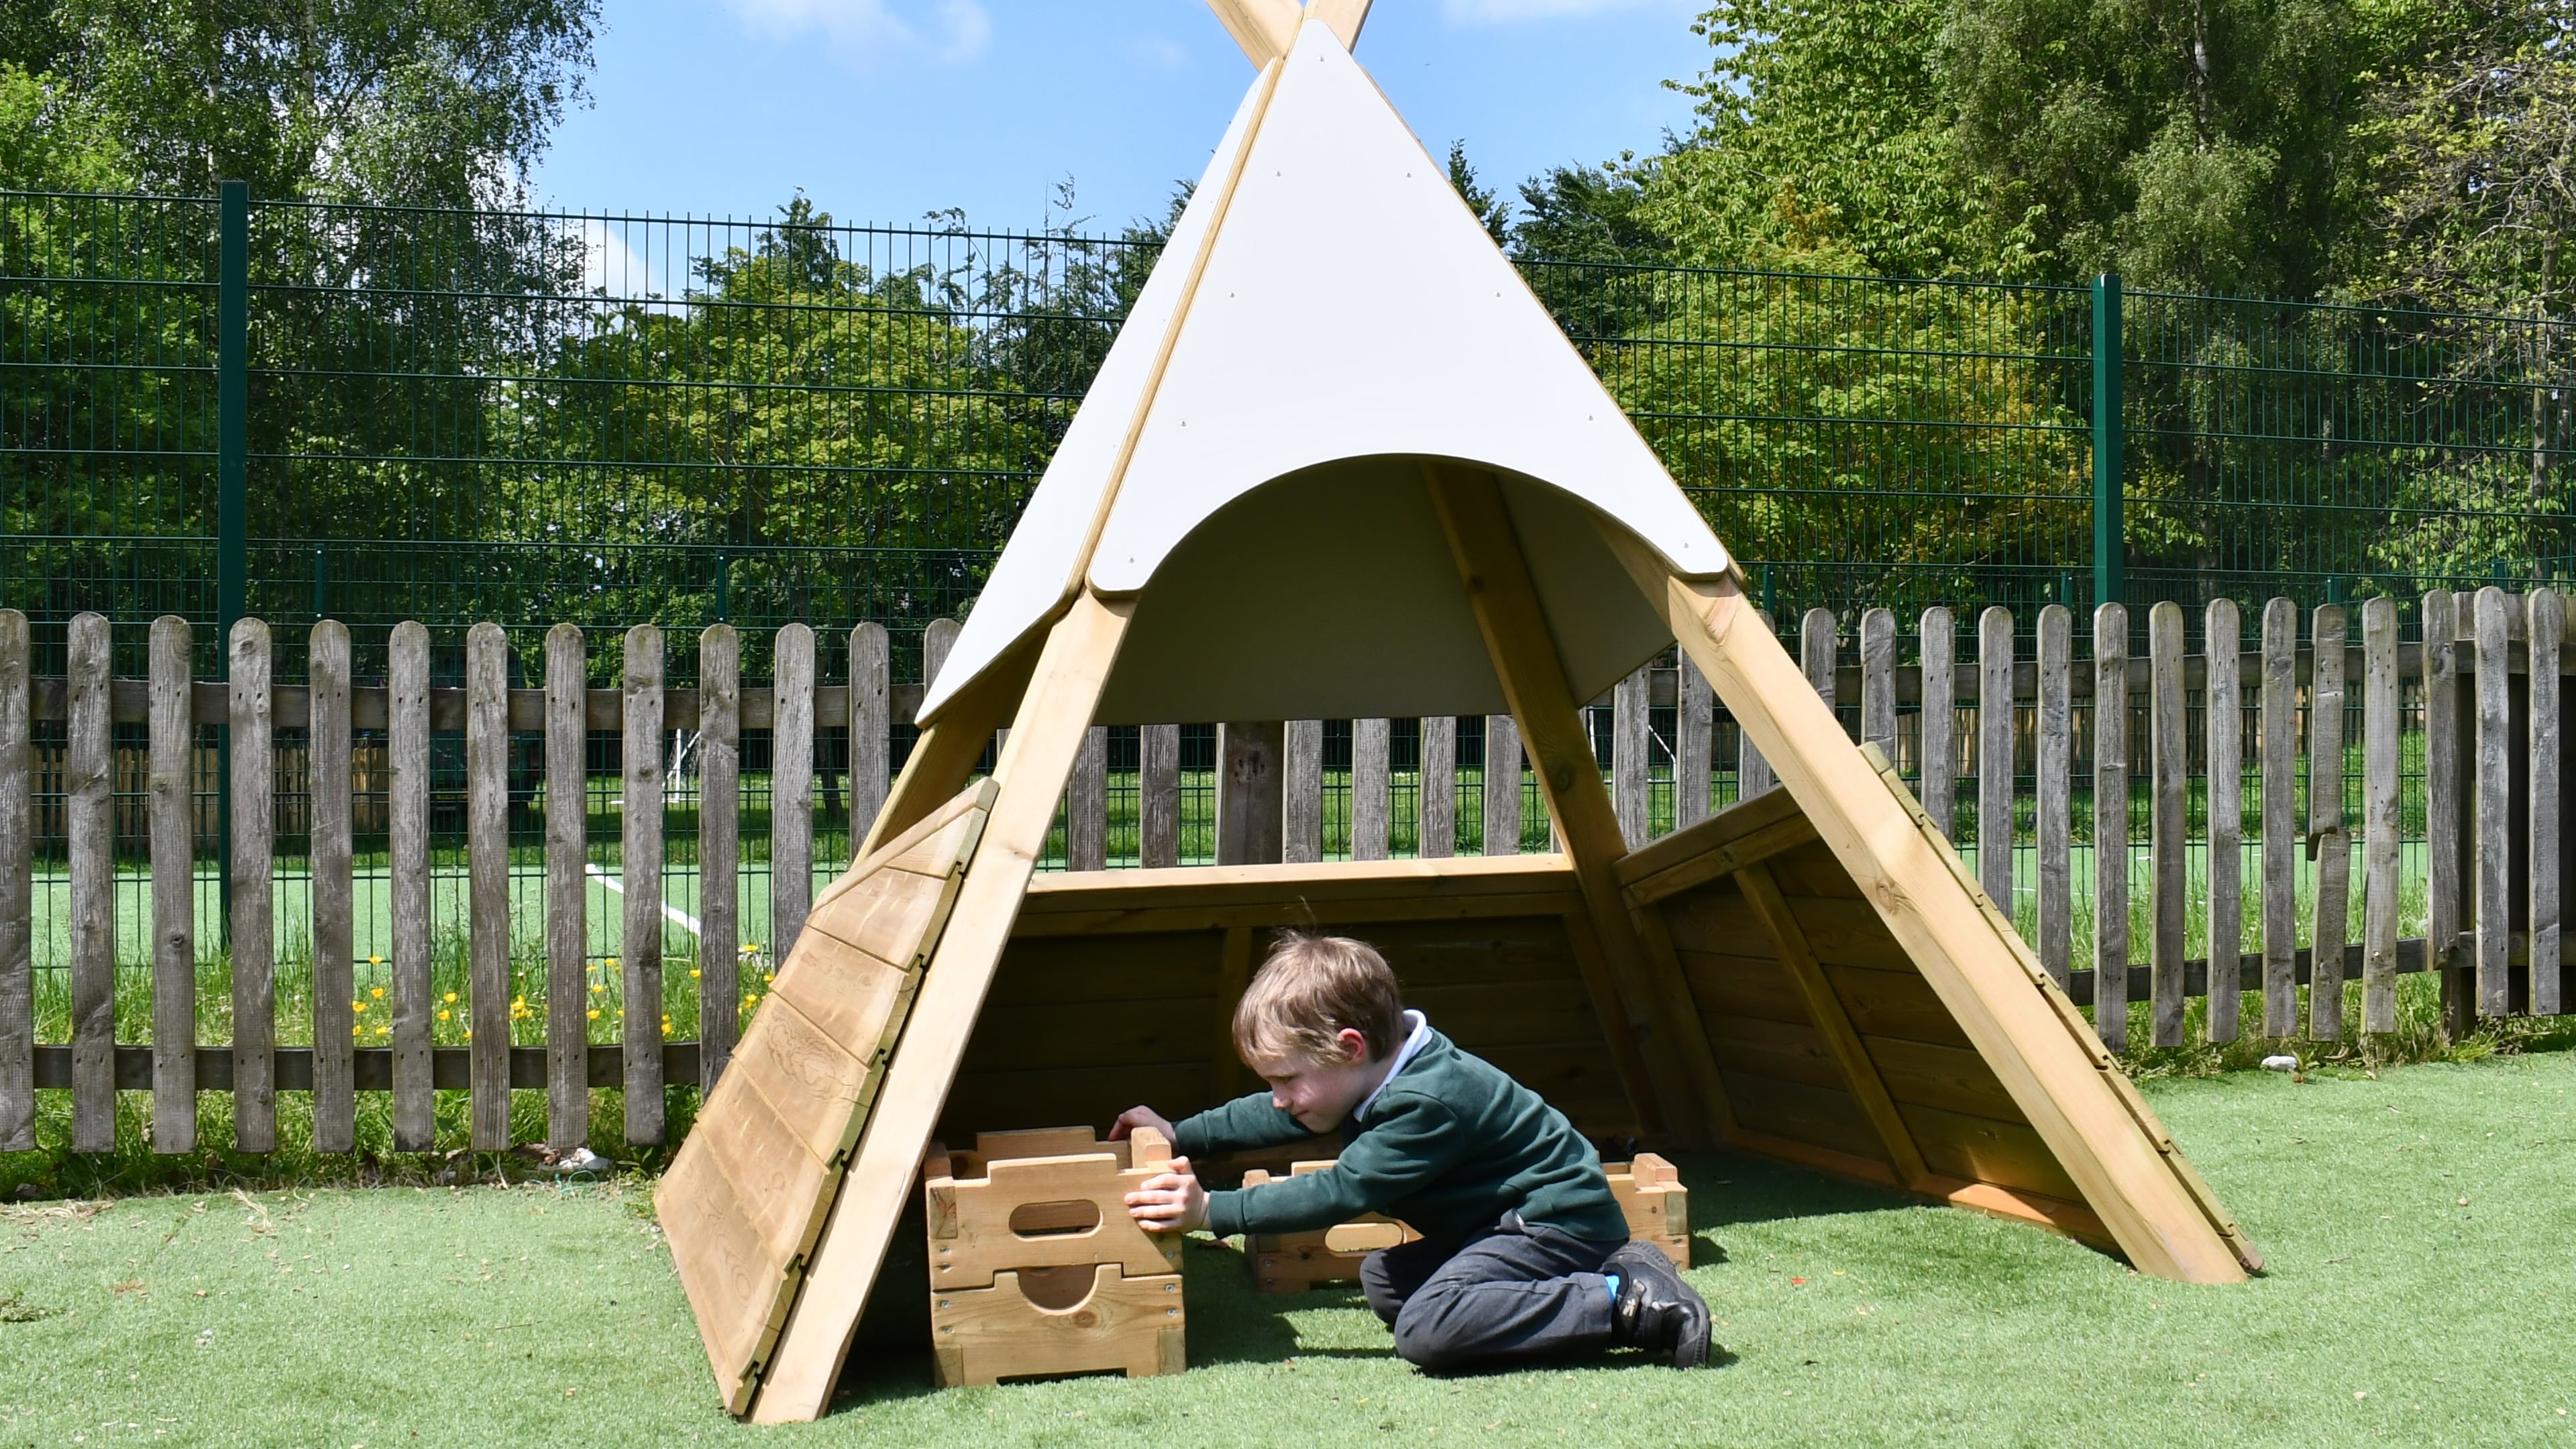 A child is sat under the Wigwam, playing with blocks and smiling. The Wigwam is surrounded by nature and the weather is nice.